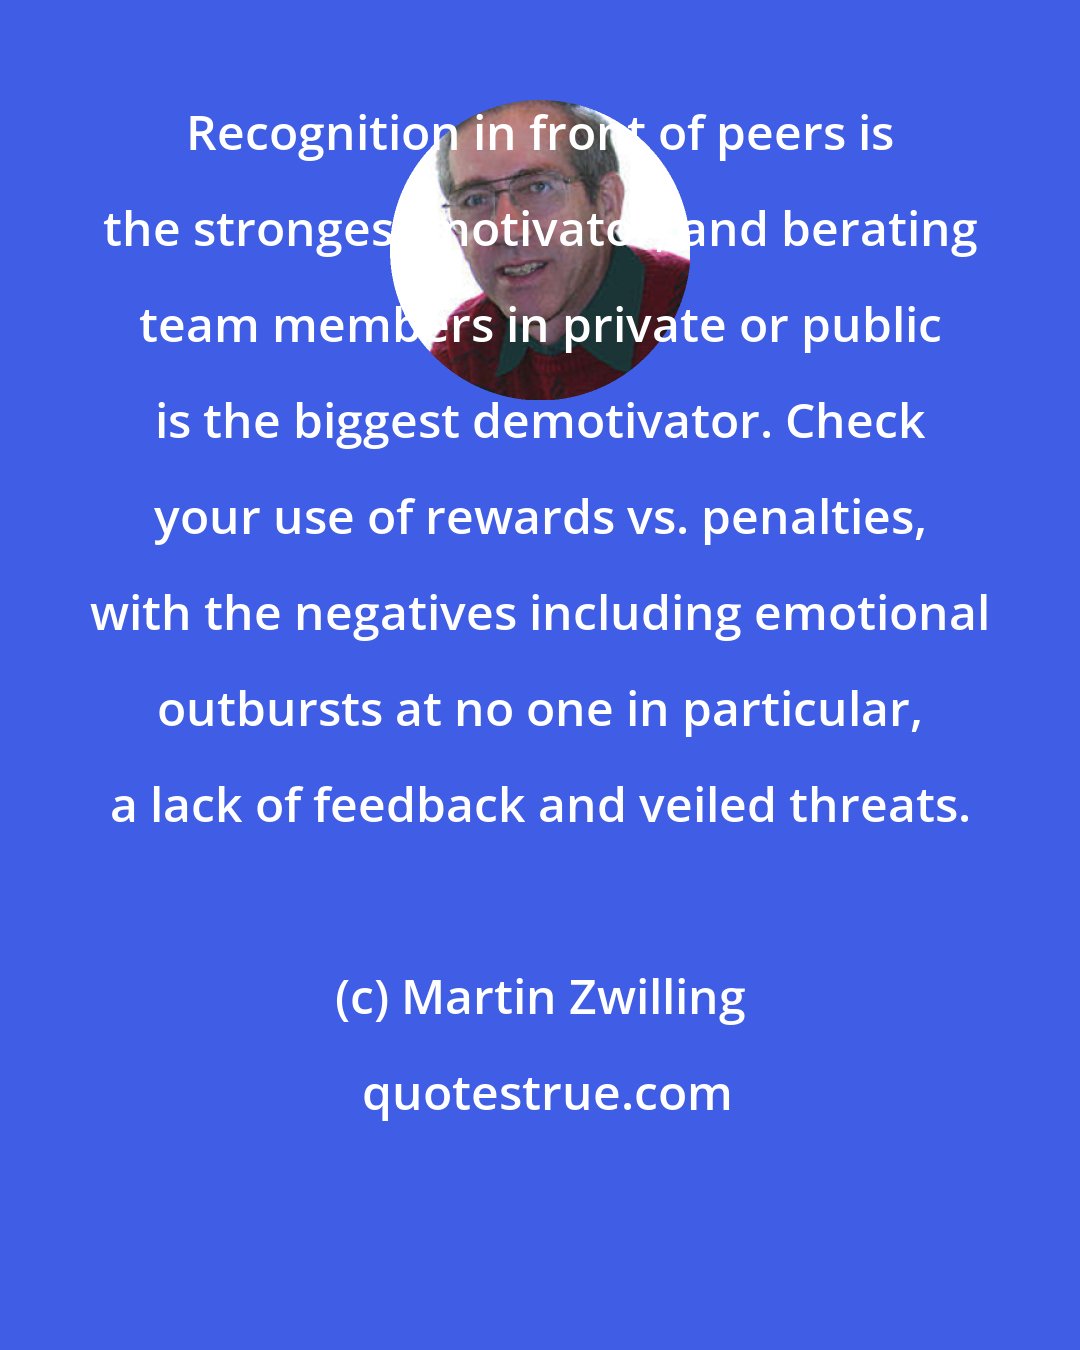 Martin Zwilling: Recognition in front of peers is the strongest motivator, and berating team members in private or public is the biggest demotivator. Check your use of rewards vs. penalties, with the negatives including emotional outbursts at no one in particular, a lack of feedback and veiled threats.